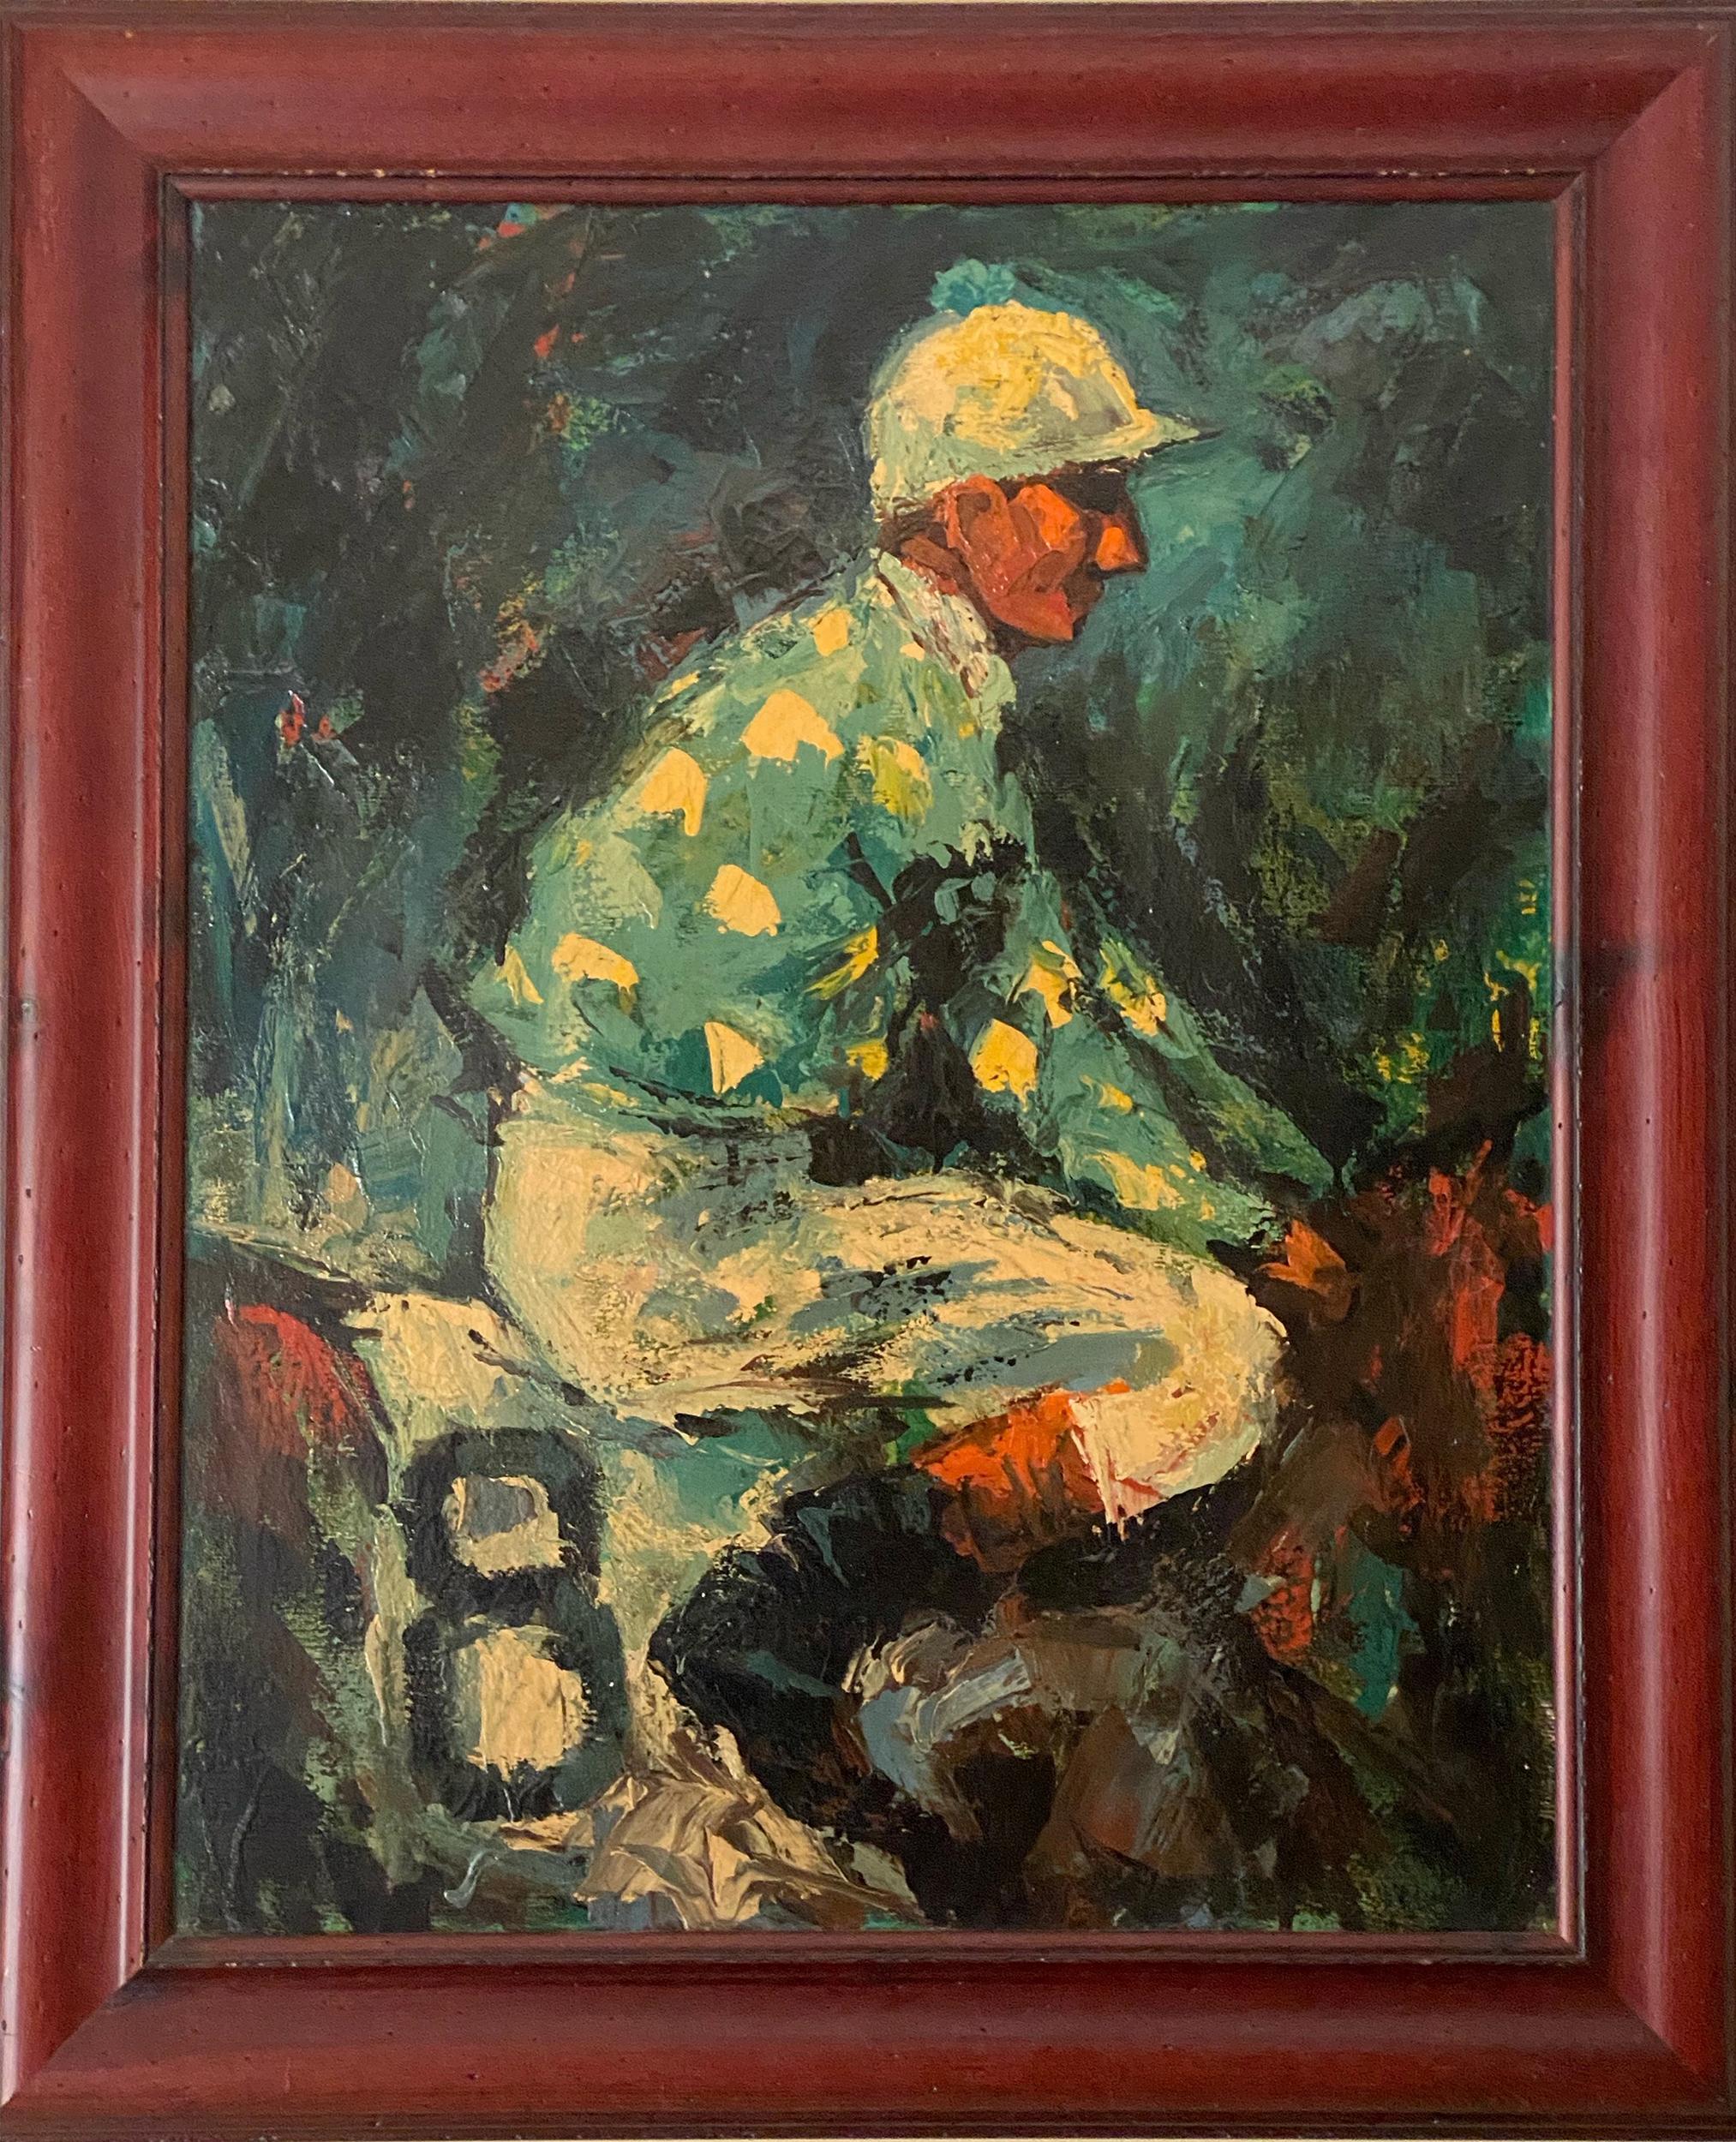 A painting of a jockey in a green shirt riding a horse with the number 8 on its saddle. The composition is cropped fairly close, cutting off everything but the back of the horse where the jockey is sitting. This piece is nicely framed and features a